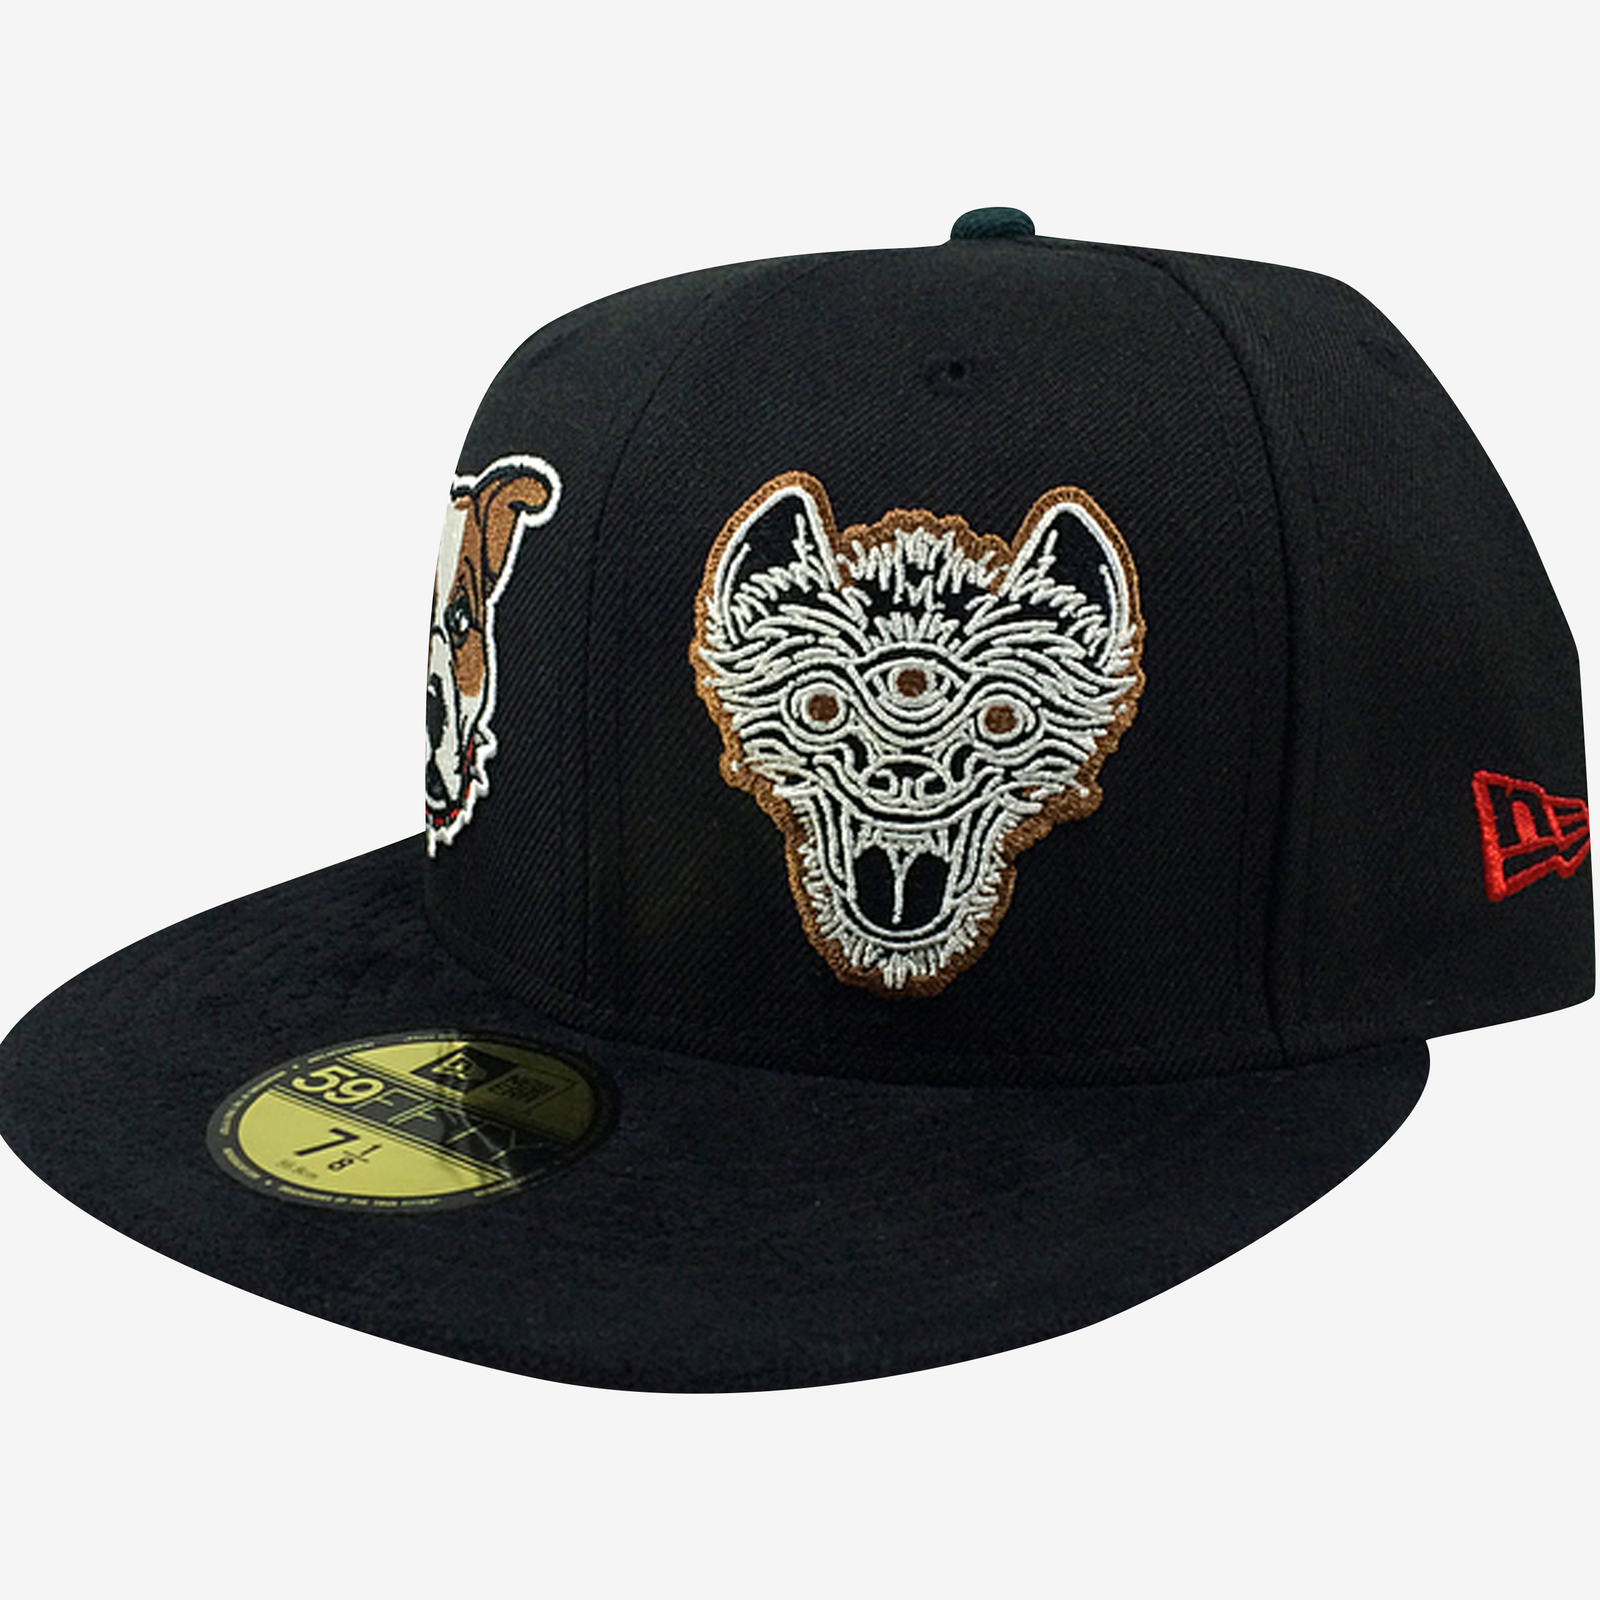 AOHEFFS FLAGRANT TWO (AOF x Heffs) New Era Fitted